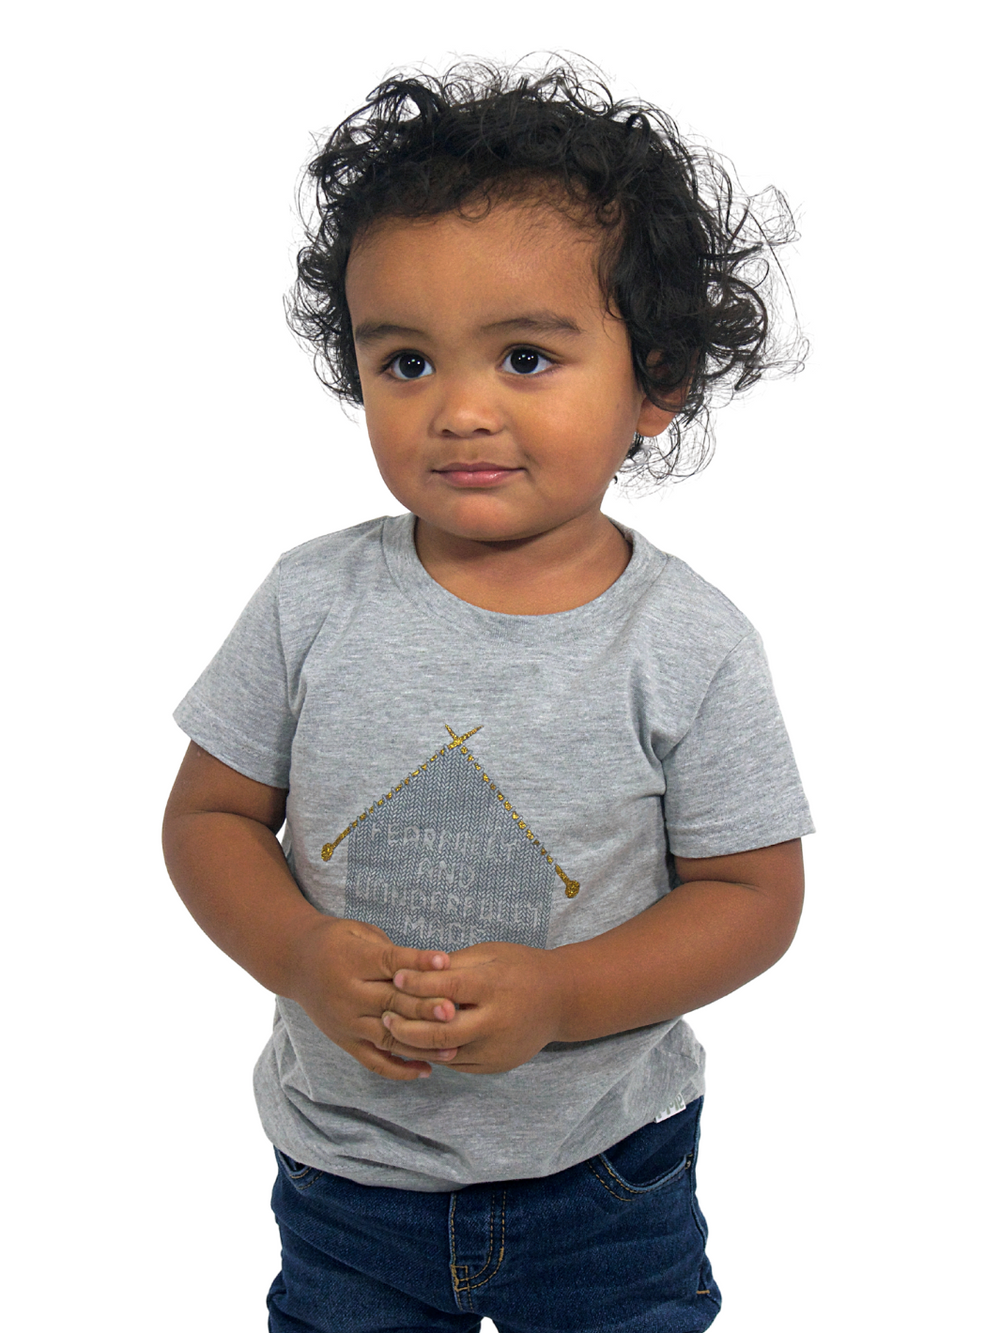 Grey Toddler T-Shirt with "Fearfully and Wonderfully Made" printed on front and woven GODinme logo tag sewn at bottom left